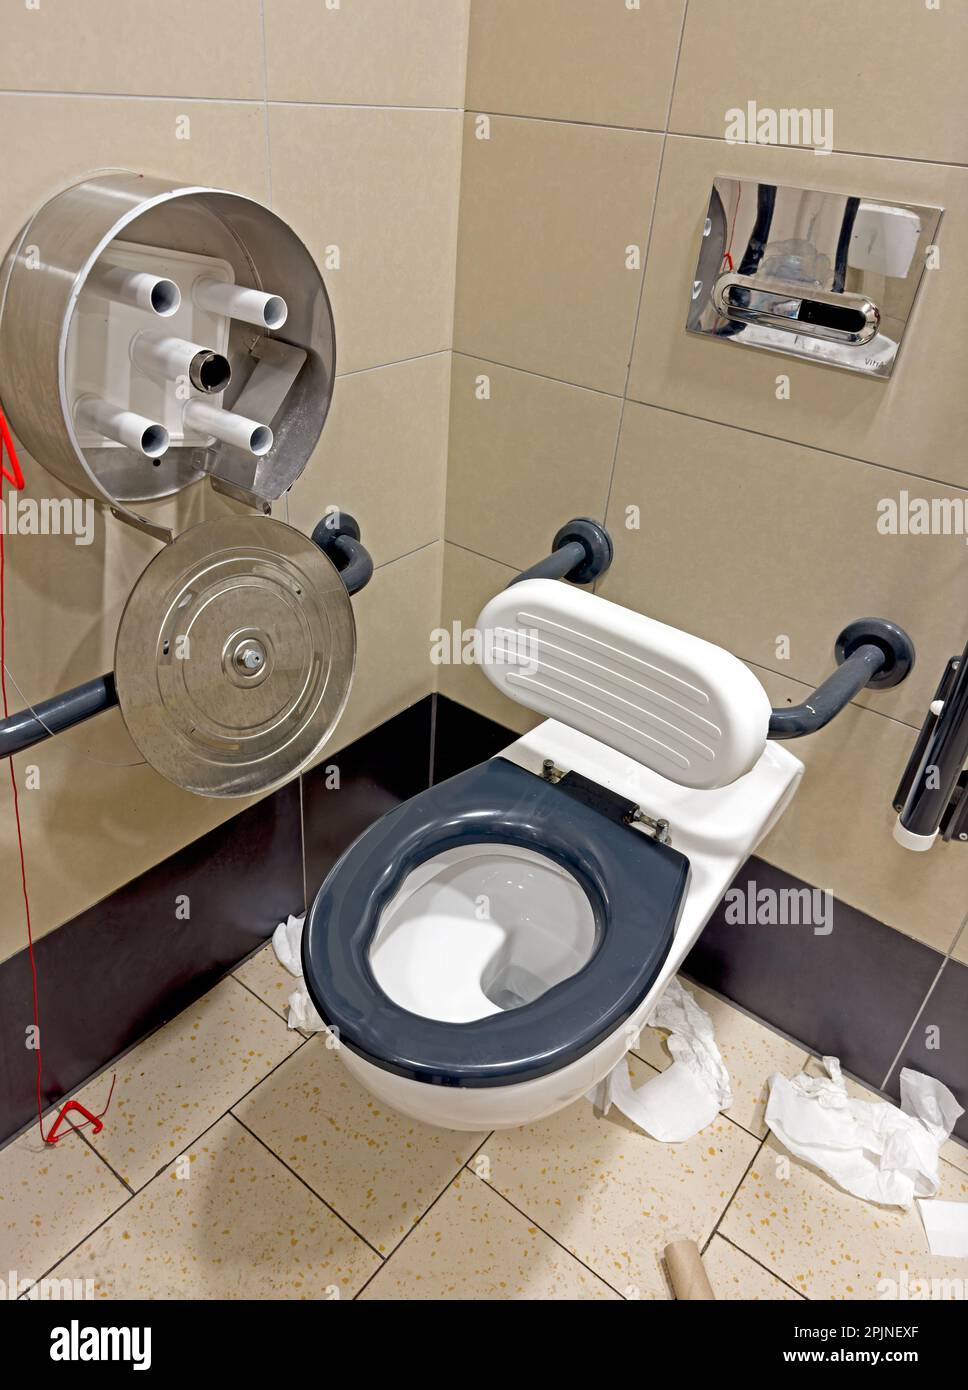 Disabled lavatory in a mess, not checked, or cleaned on a regular basis, UK Stock Photo